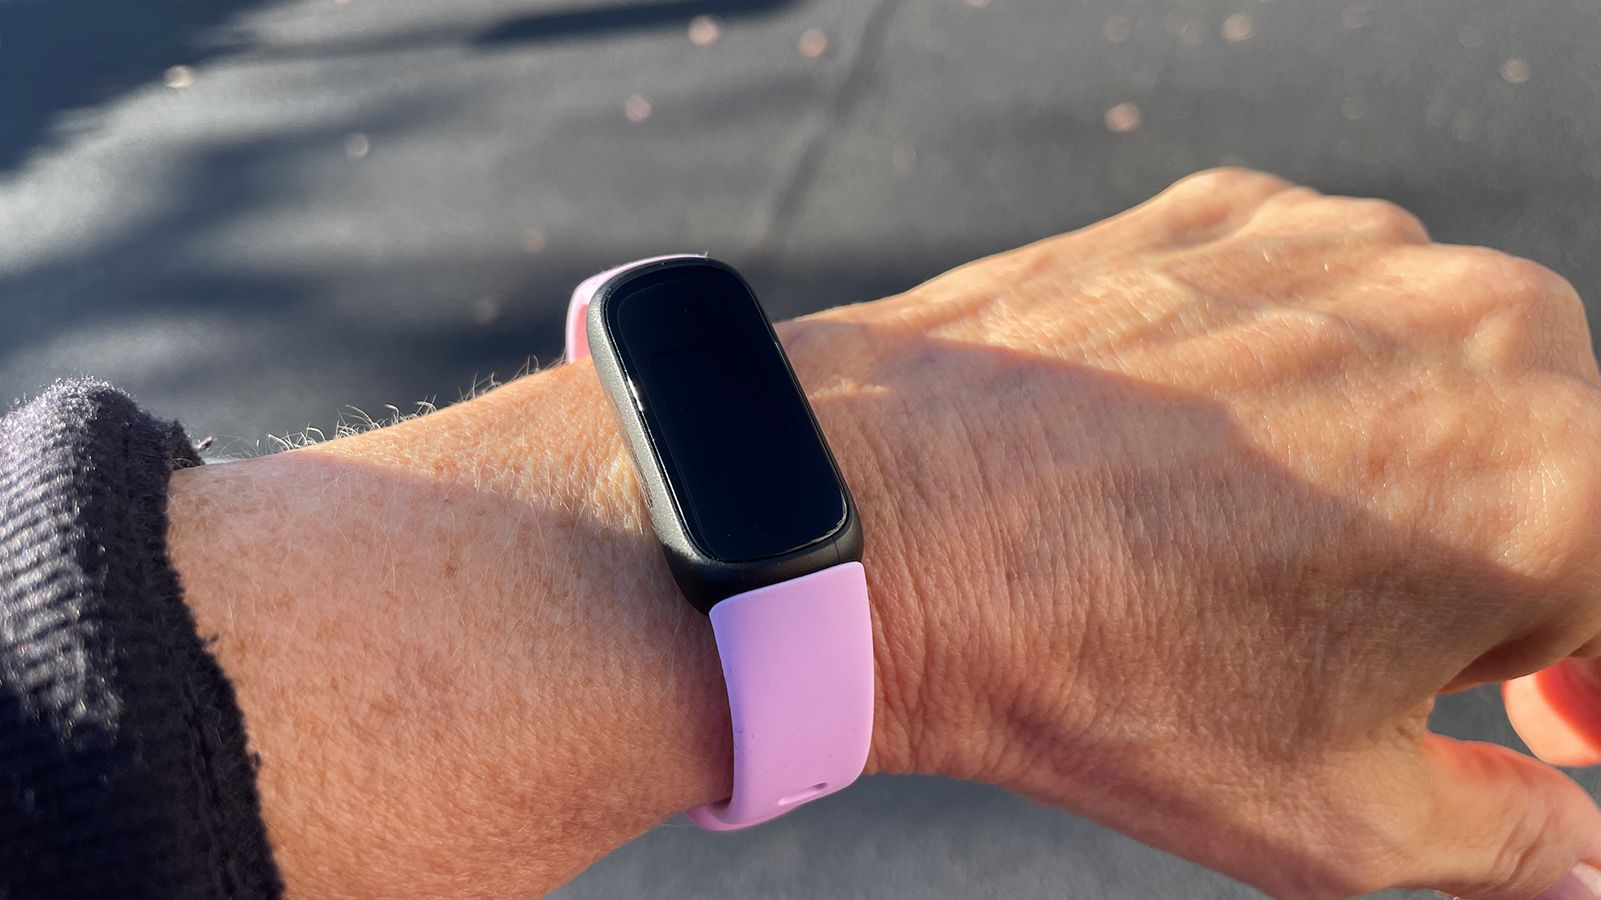 Fitbit Inspire 3 Lilac (bliss/svart) - Smartwatches 